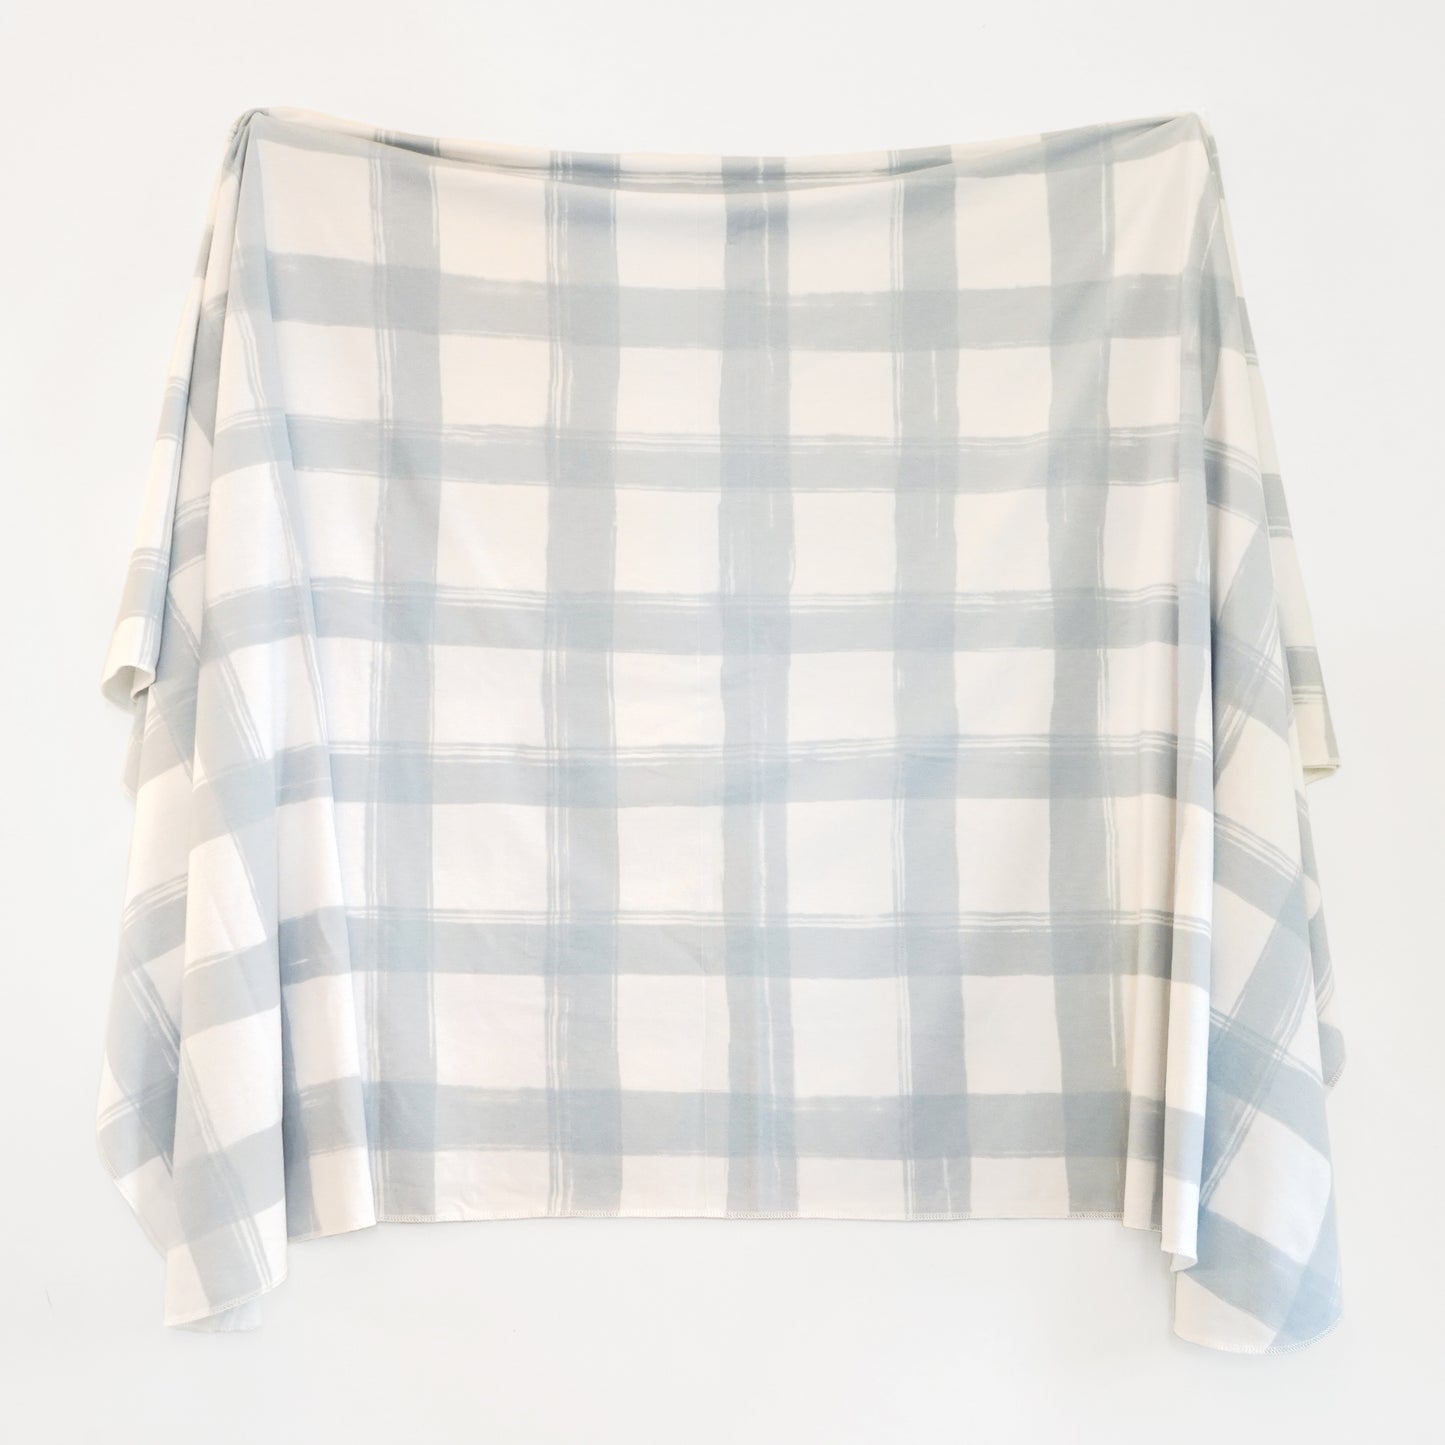 Extra Soft Stretchy Knit Swaddle Blanket: French Gingham